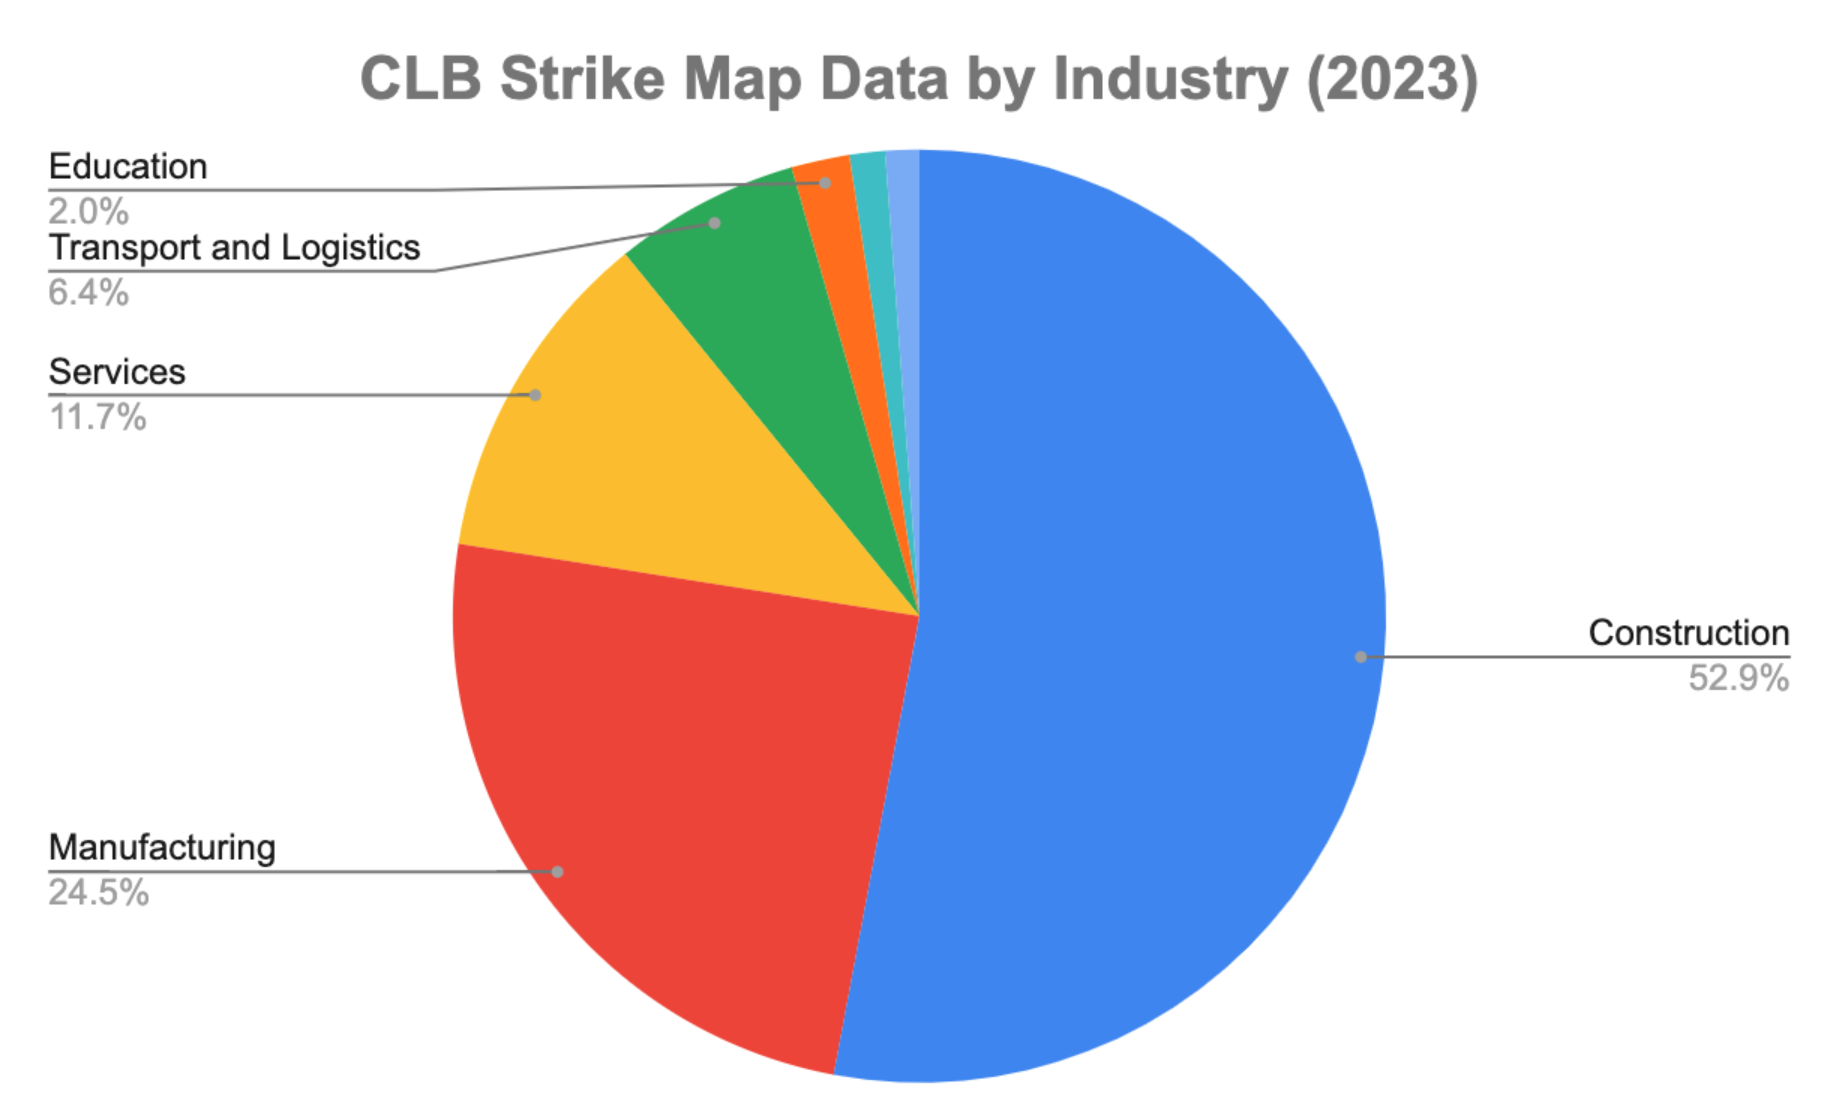 CLB Strike Map data by industry (2023)